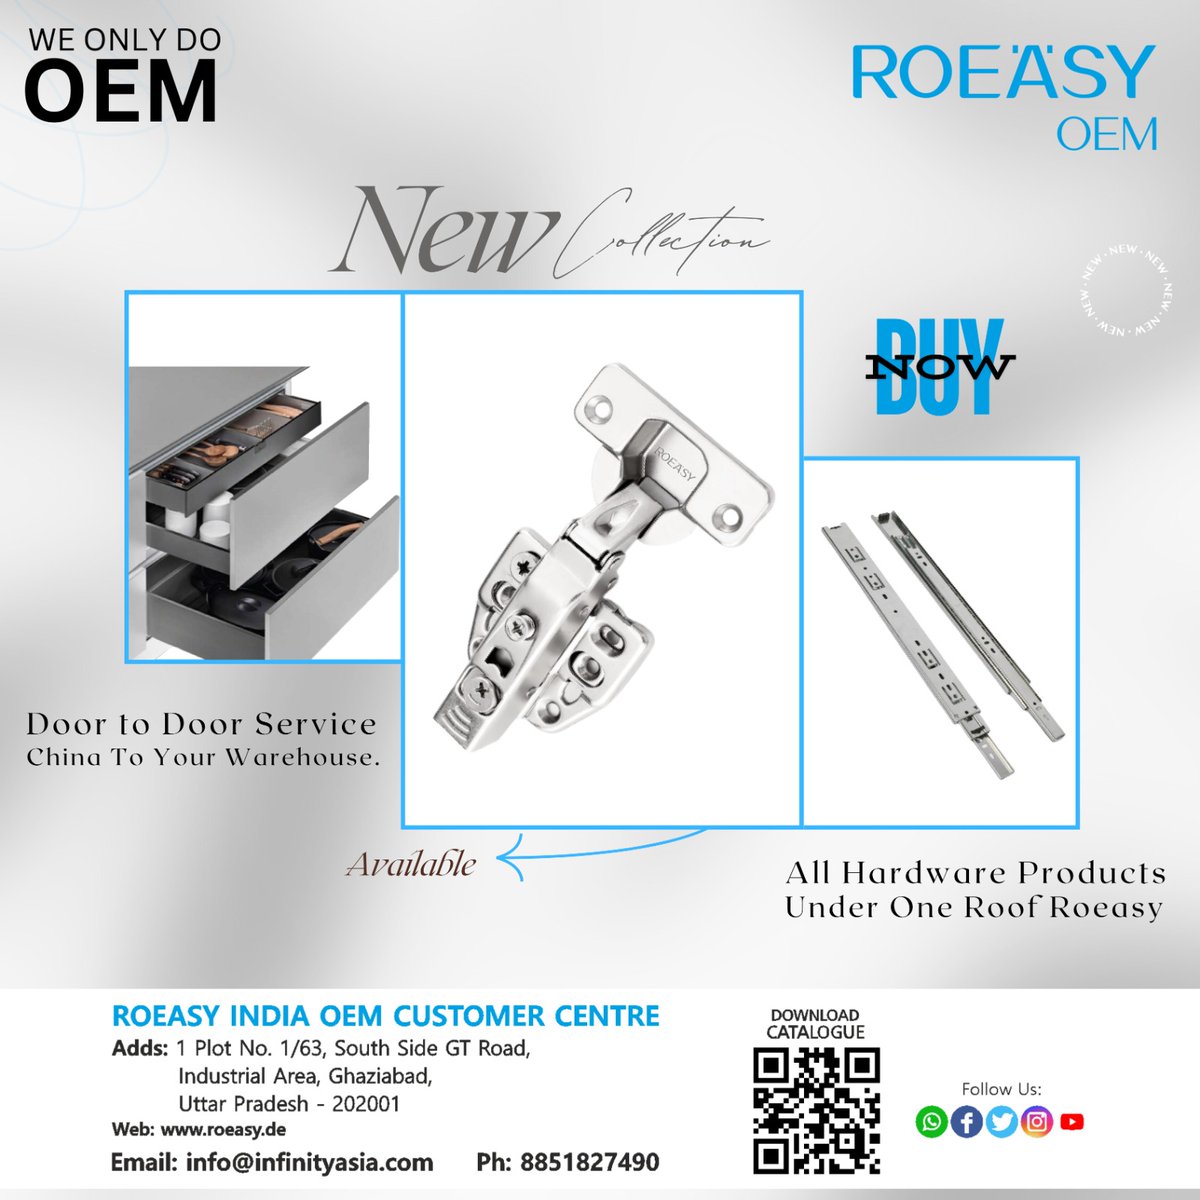 Discover the perfect blend of style and utility with '𝐑𝐨𝐞𝐚𝐬𝐲' kitchen hardware collection under one roof.

#Roeasy #Roeasyindia #3DPrinting #HydraulicHinges #BedFittings #FurnitureDesign #HomeImprovement #DIYProjects #InteriorDesign #FurnitureHardware #InnovativeDesign